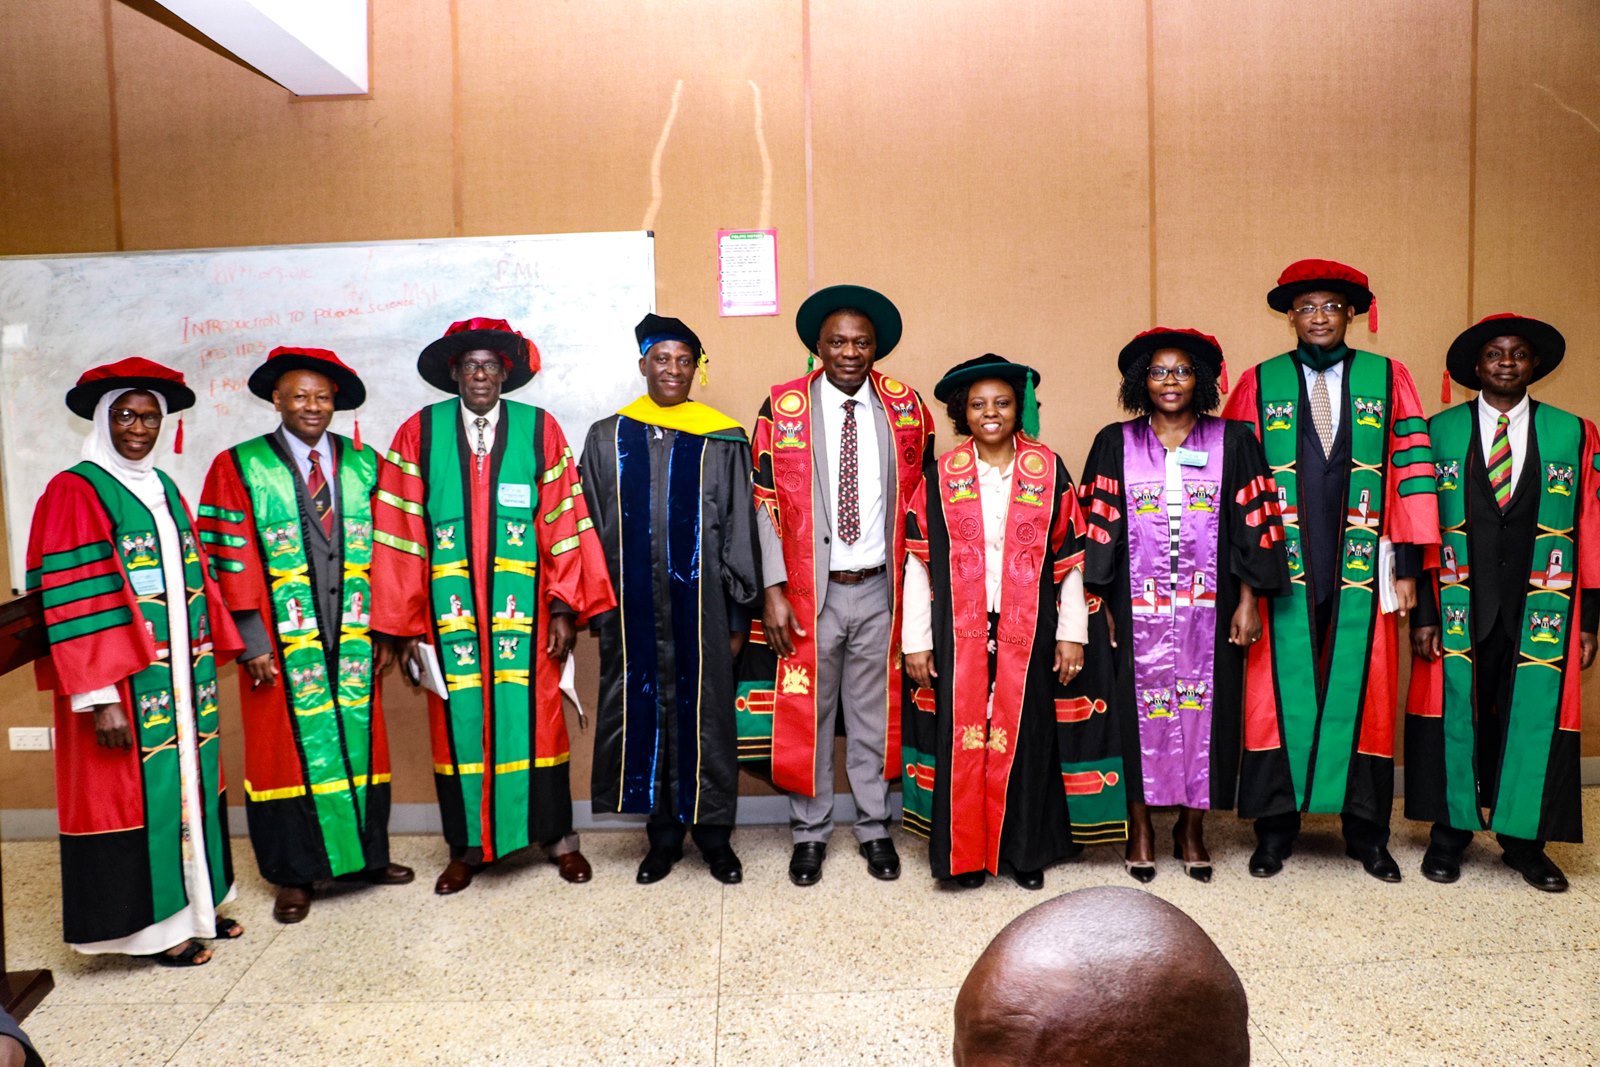 The College of Health Sciences (CHS) Leadership in a group photo before the First Session of Makerere University's 72nd Graduation Ceremony. Photo by Davidson Ndyabahika